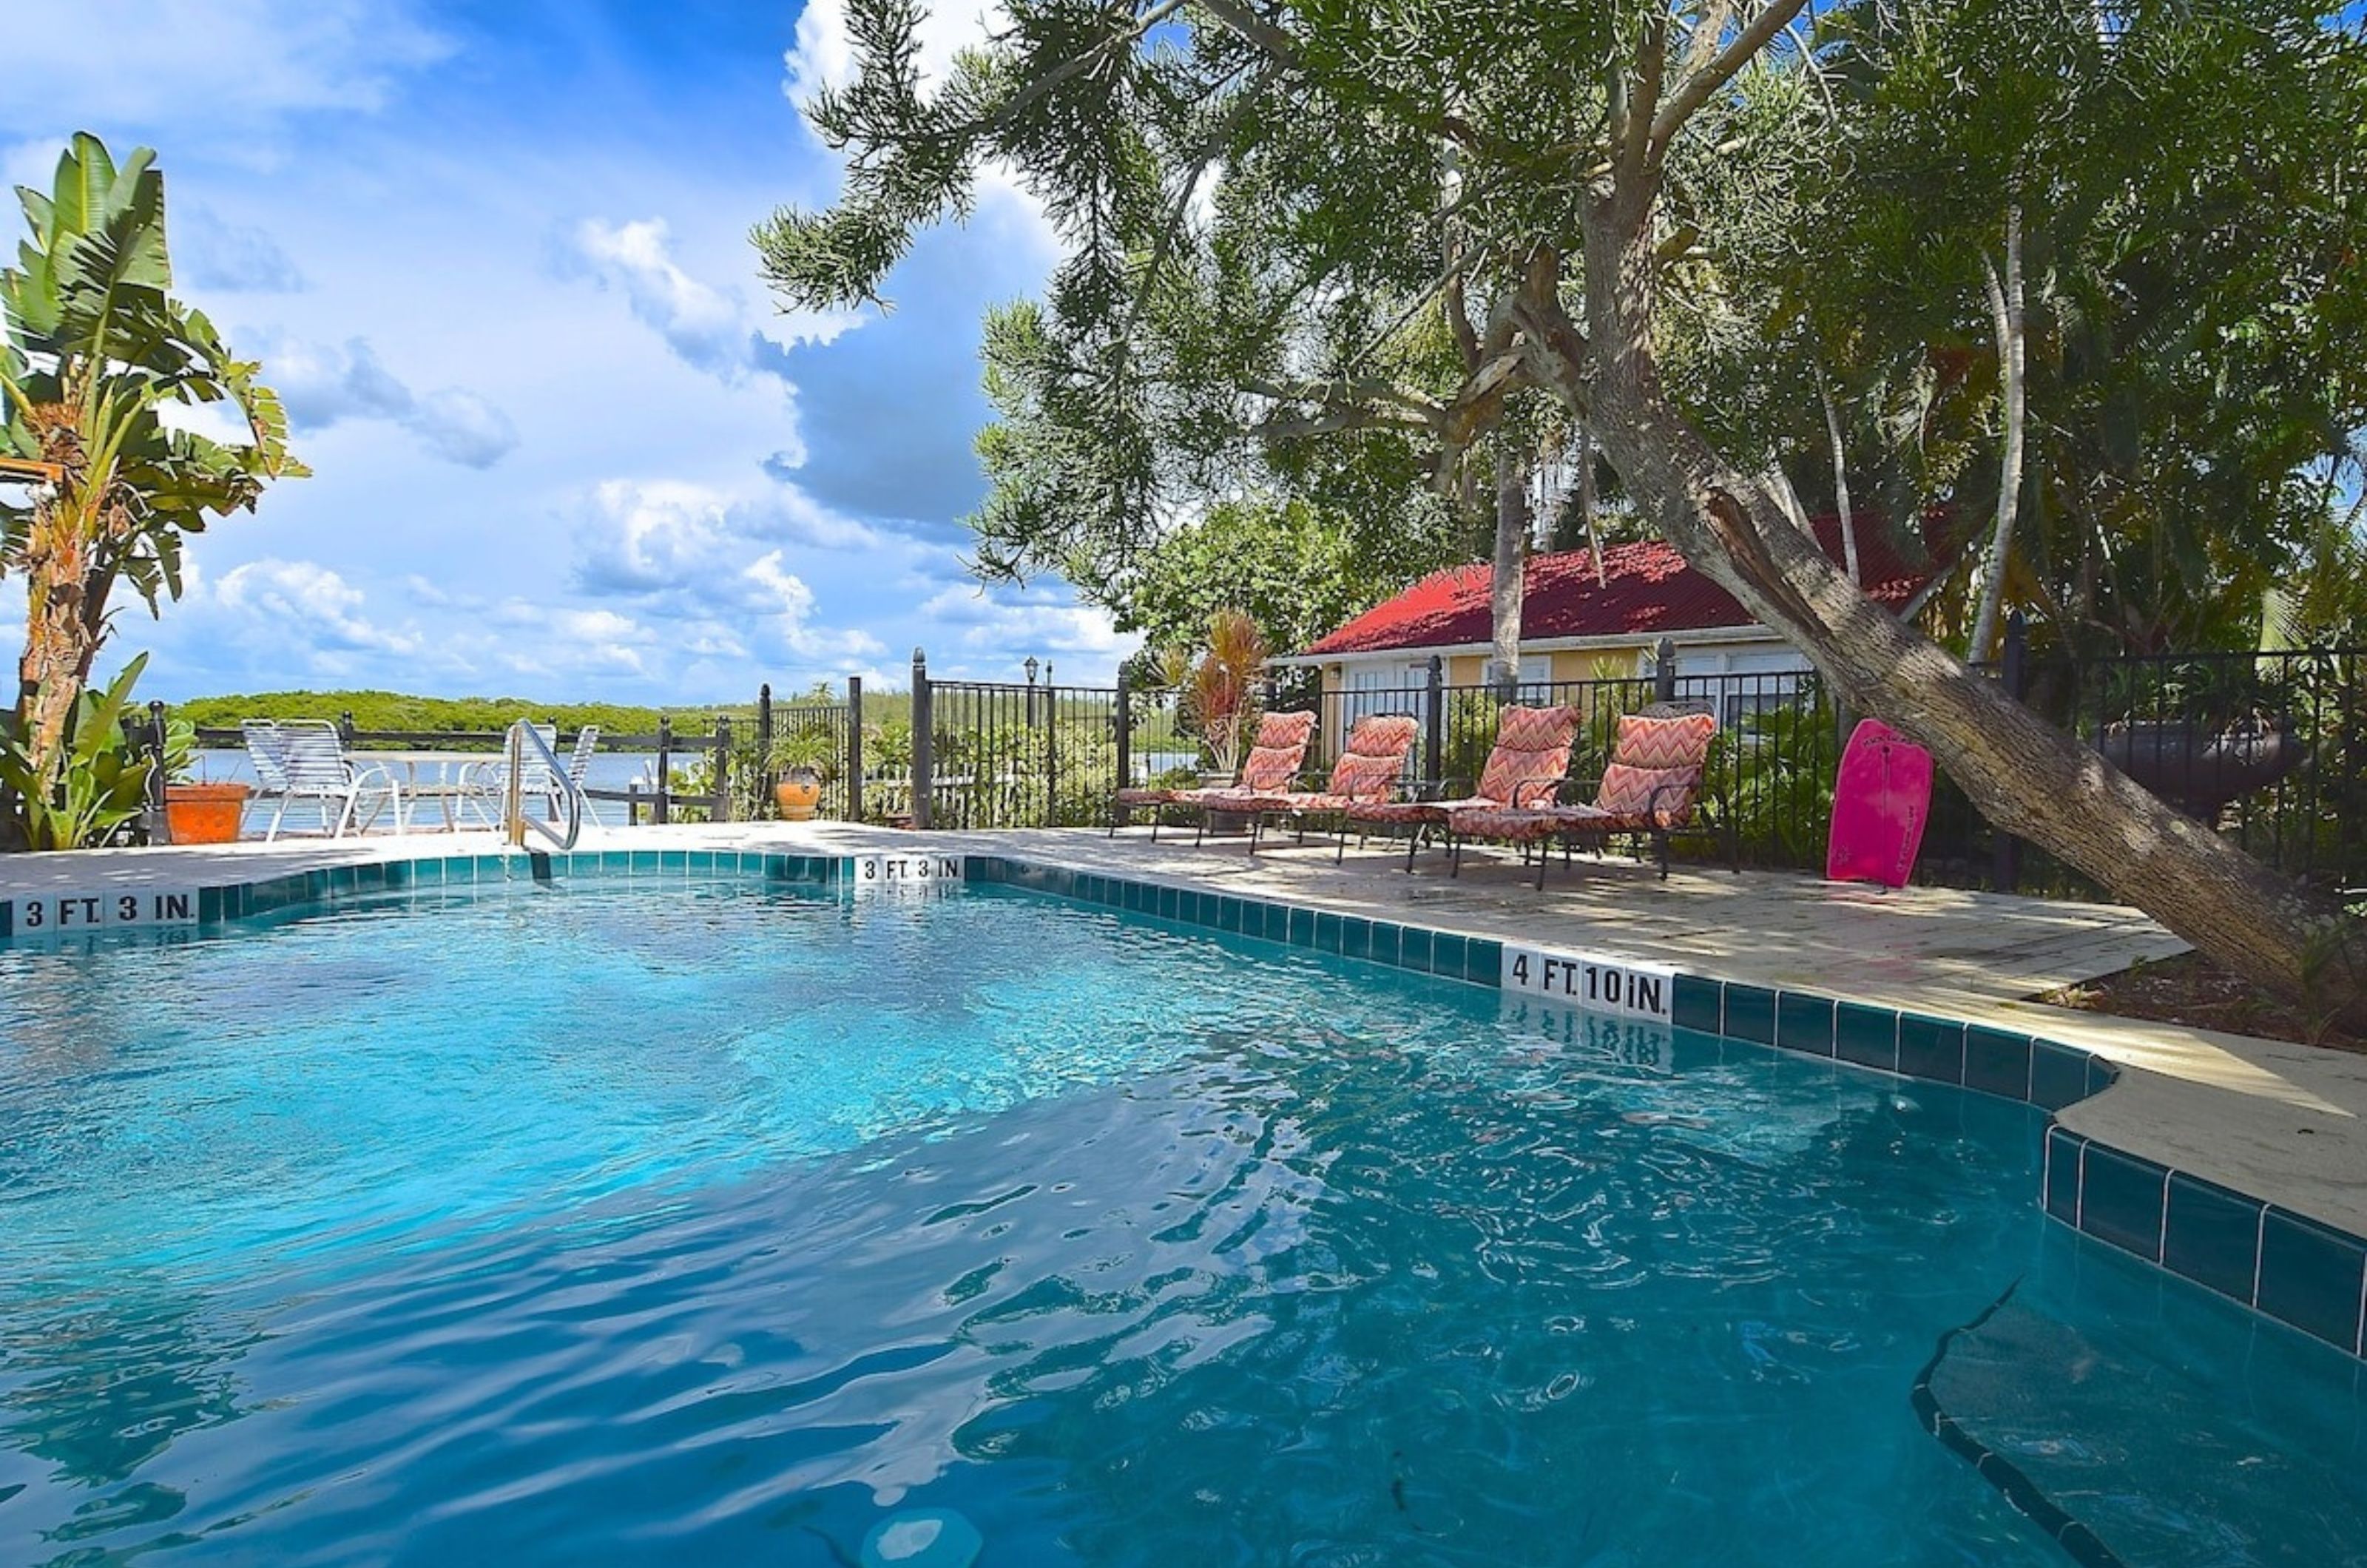 The outdoor pool and pool deck at the Inn at Turtle Beach in Siesta Key Florida 